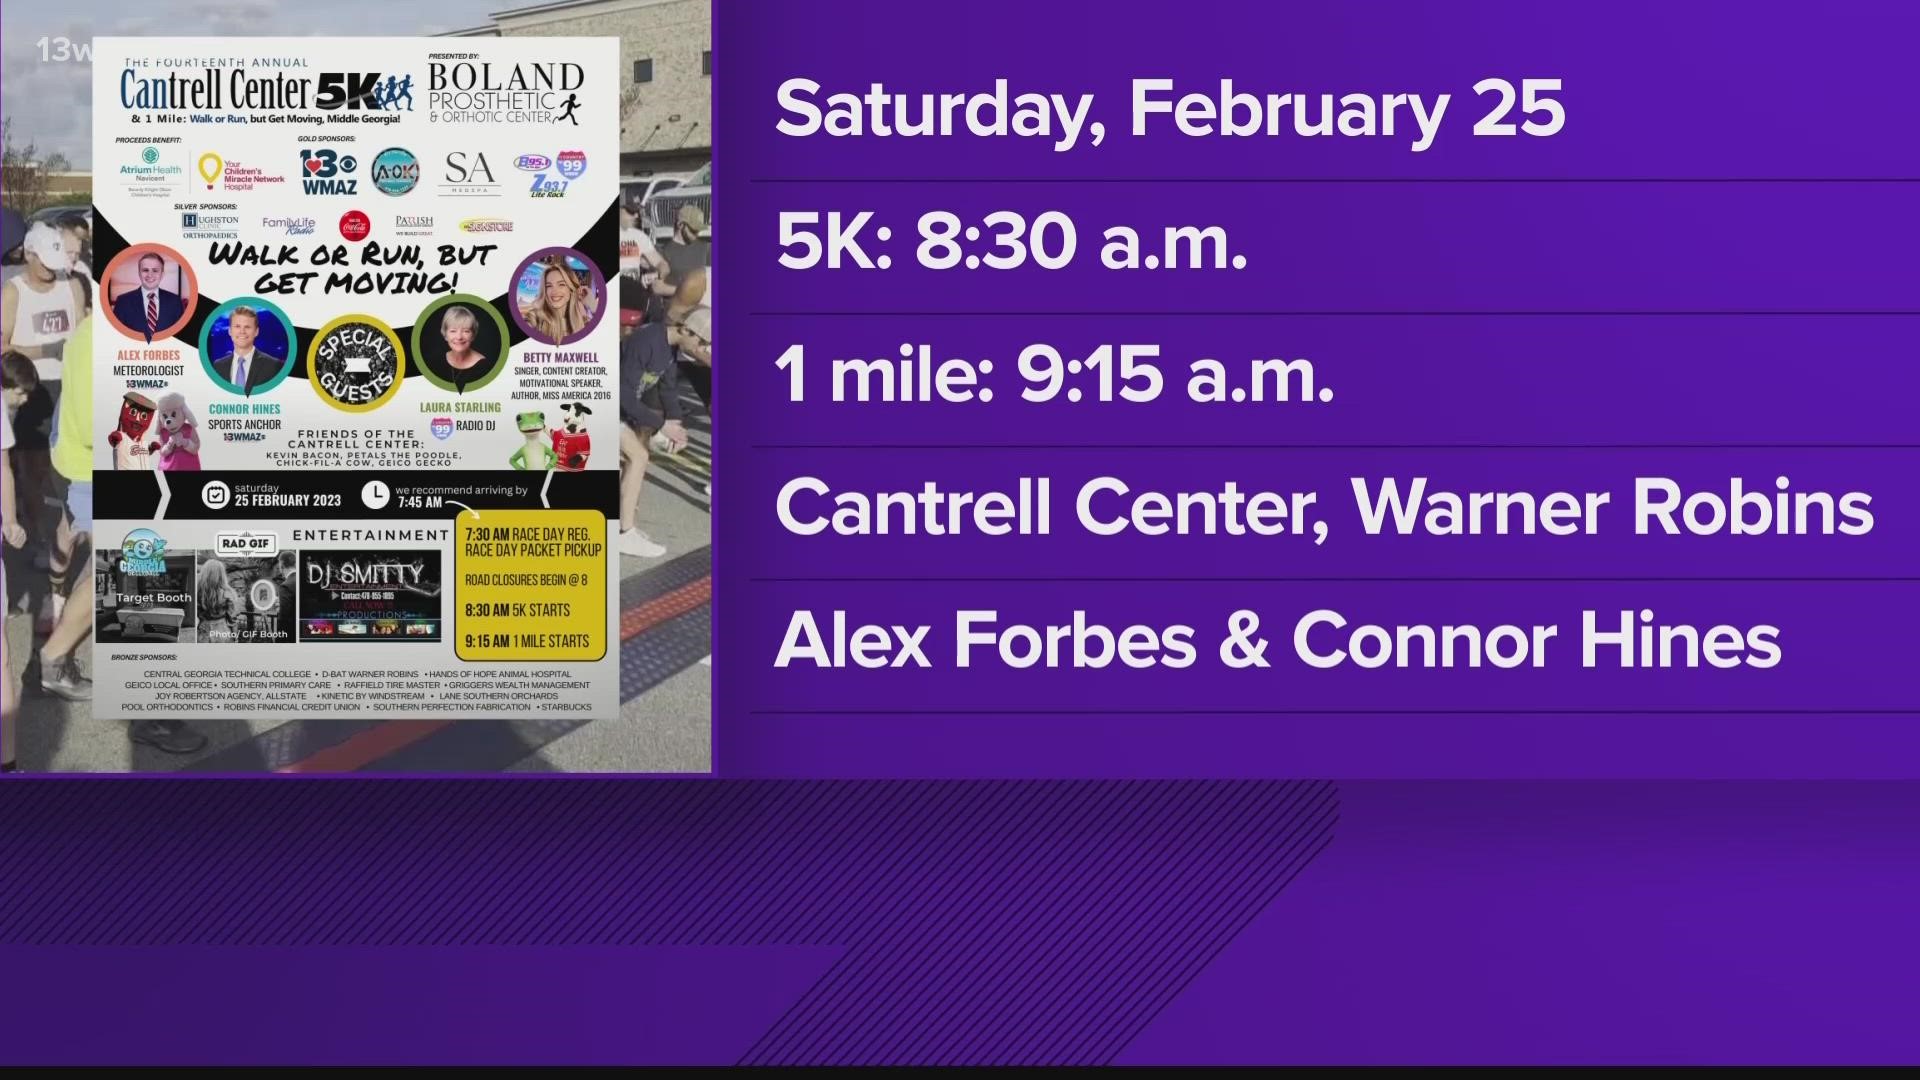 Registration is now open for the Annual Cantrell Center 5K and 1 Mile Fun Run.